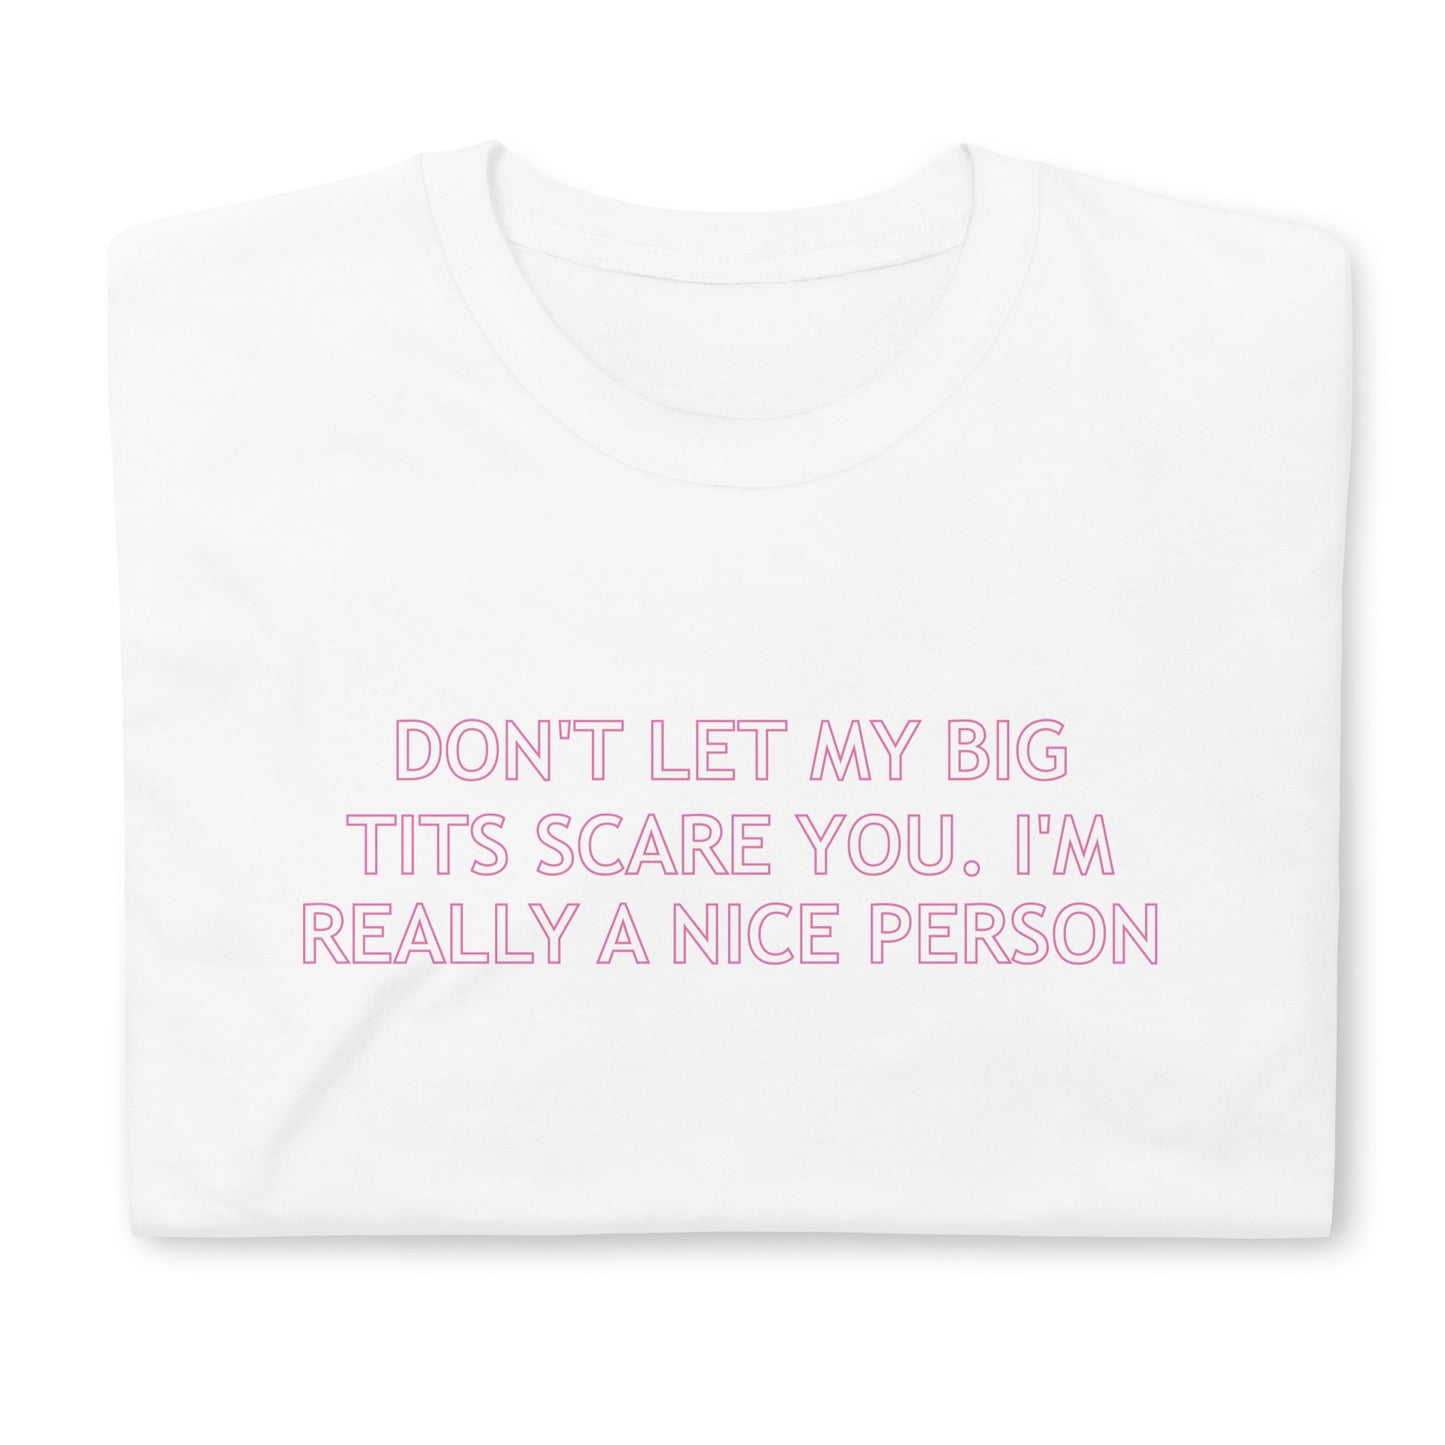 DON'T LET MY BIG TITS SCARE YOU. I'M REALLY A NICE PERSON Short-Sleeve Unisex T-Shirt